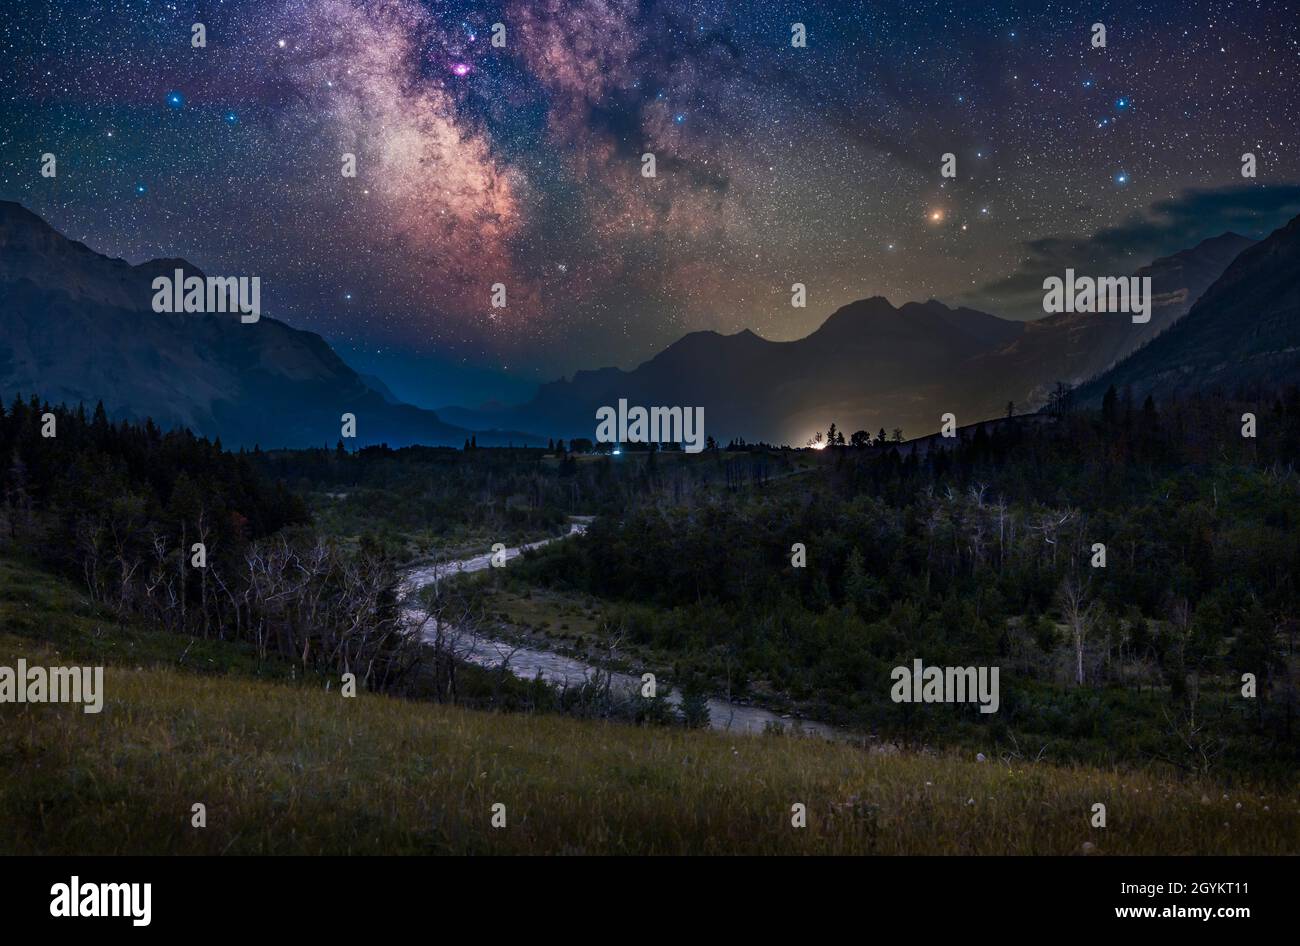 The galactic core area of the northern summer Milky Way over the Blakiston Valley and Blakiston Creek in Waterton Lakes National Park, Alberta on a Ju Stock Photo